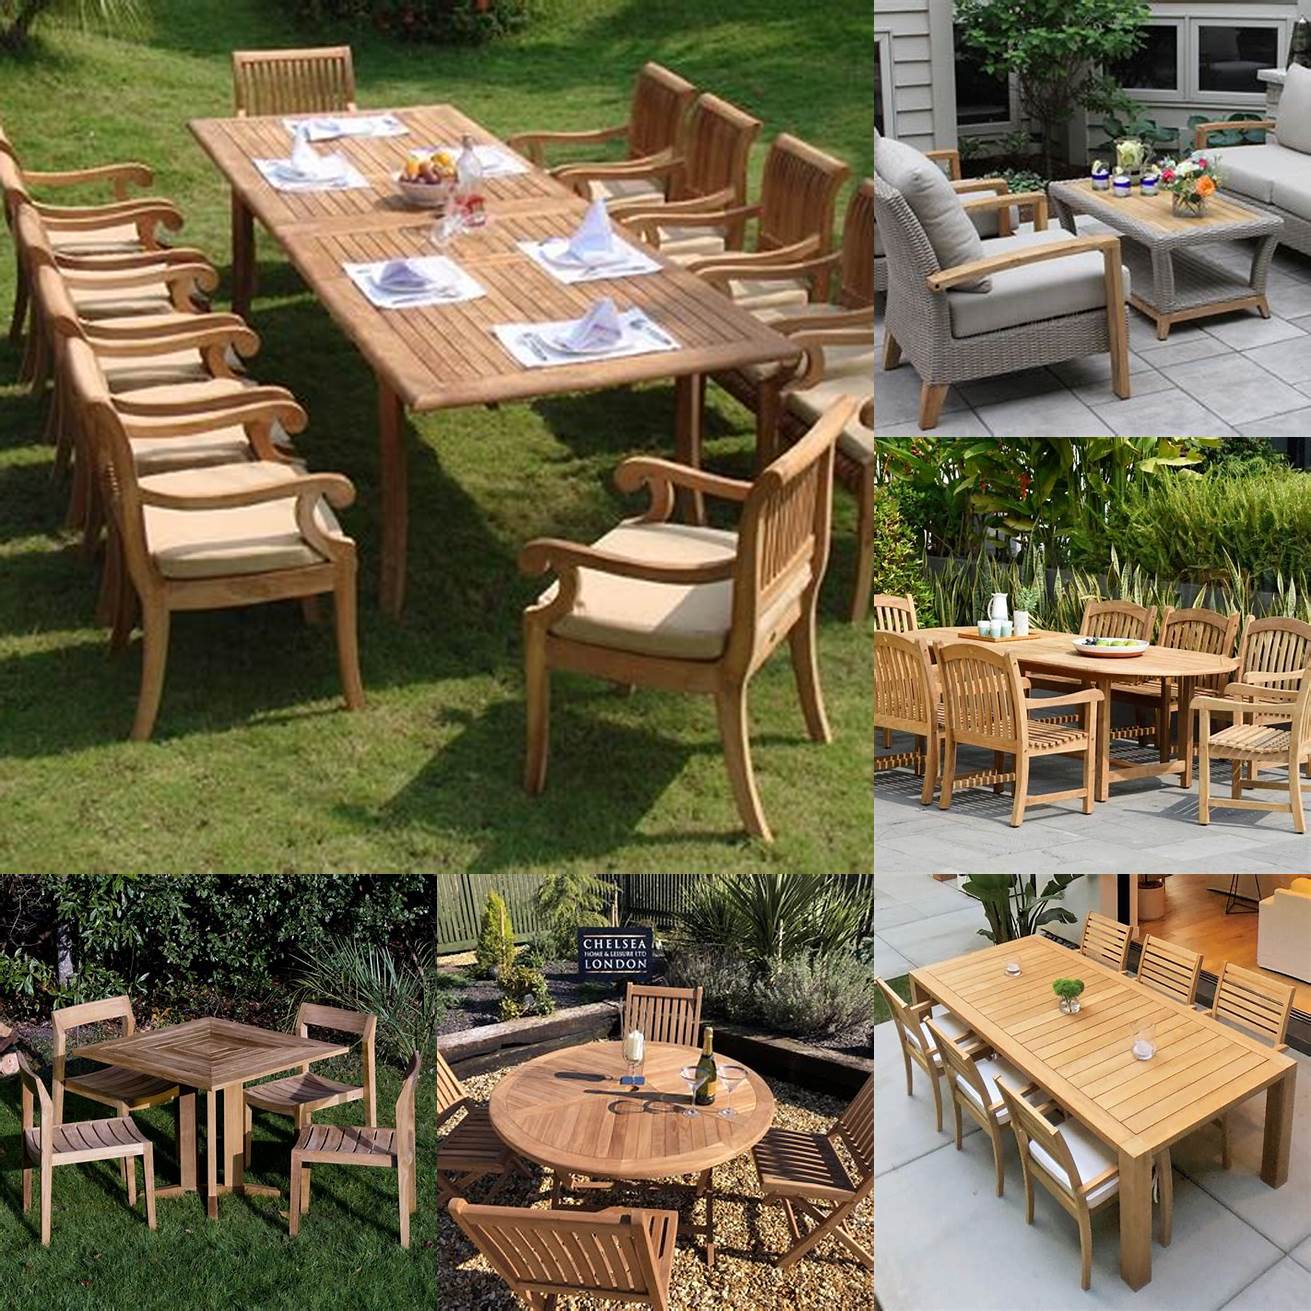 A picture of teak deck furniture being compared to other types of outdoor furniture